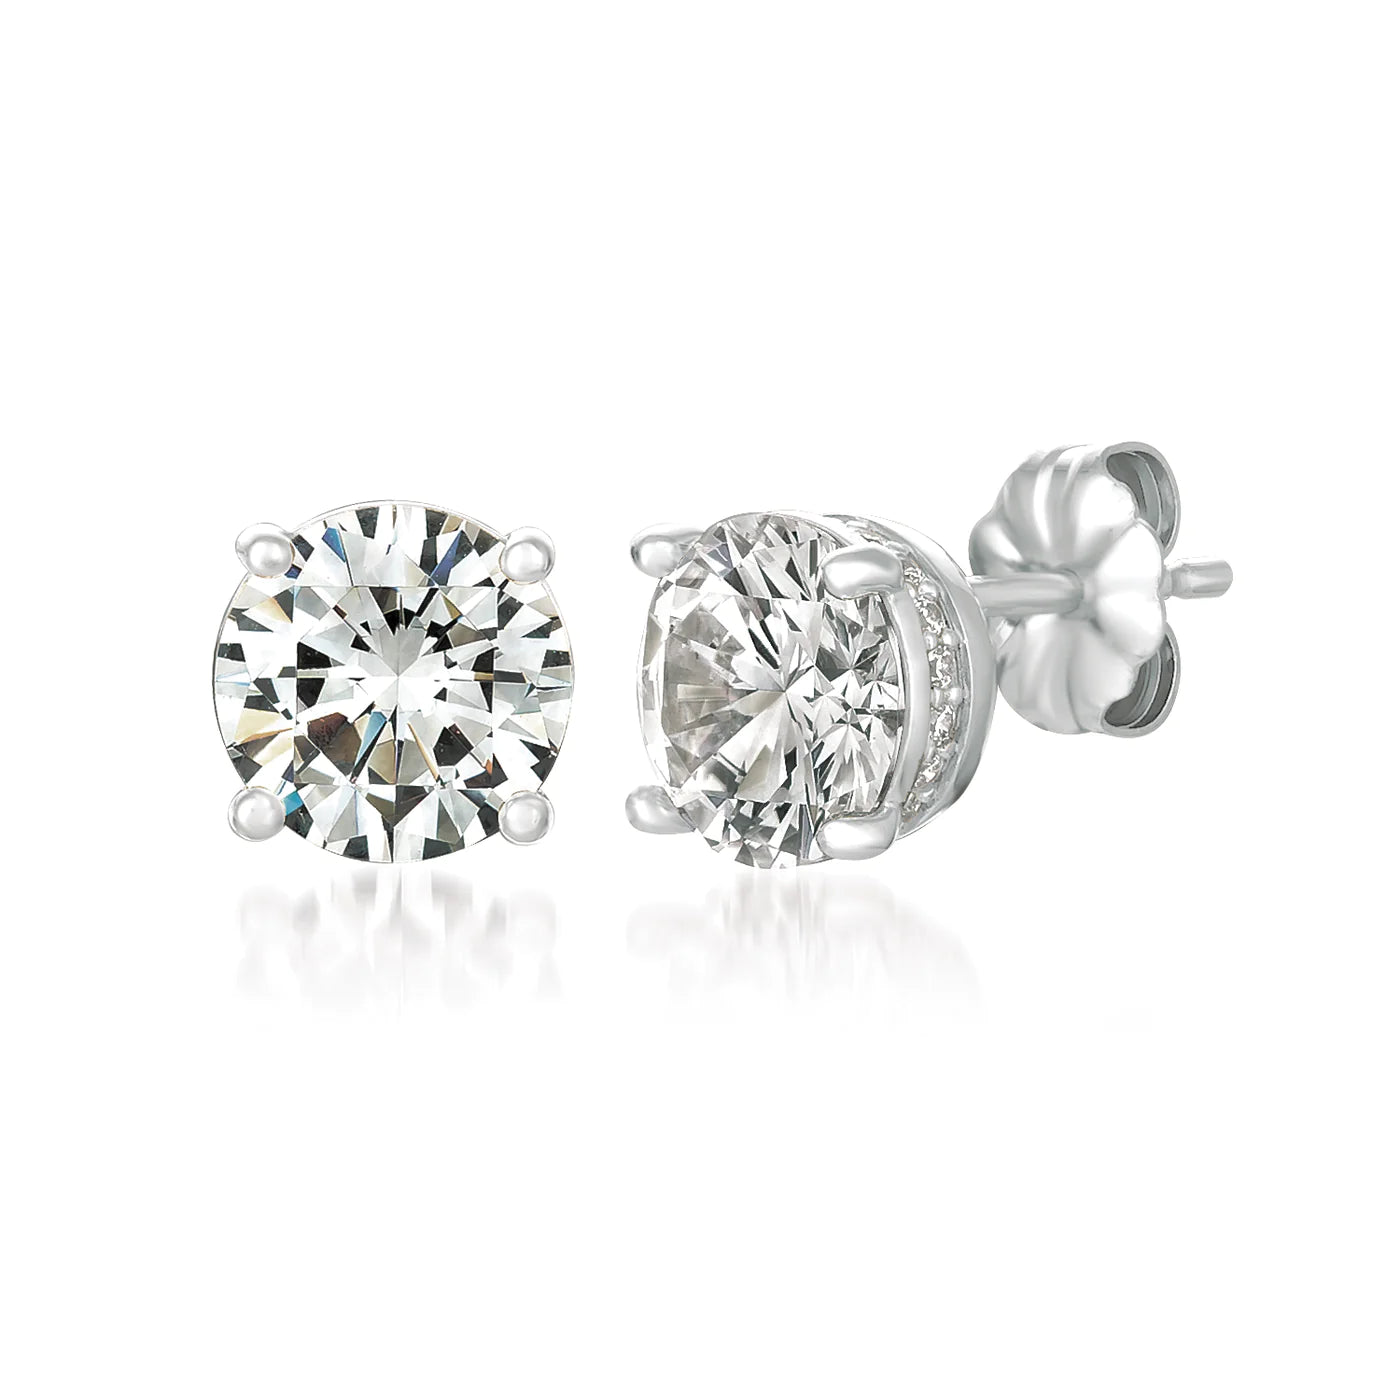 Royal Brilliant Cut Stud Earrings Finished in Pure Platinum